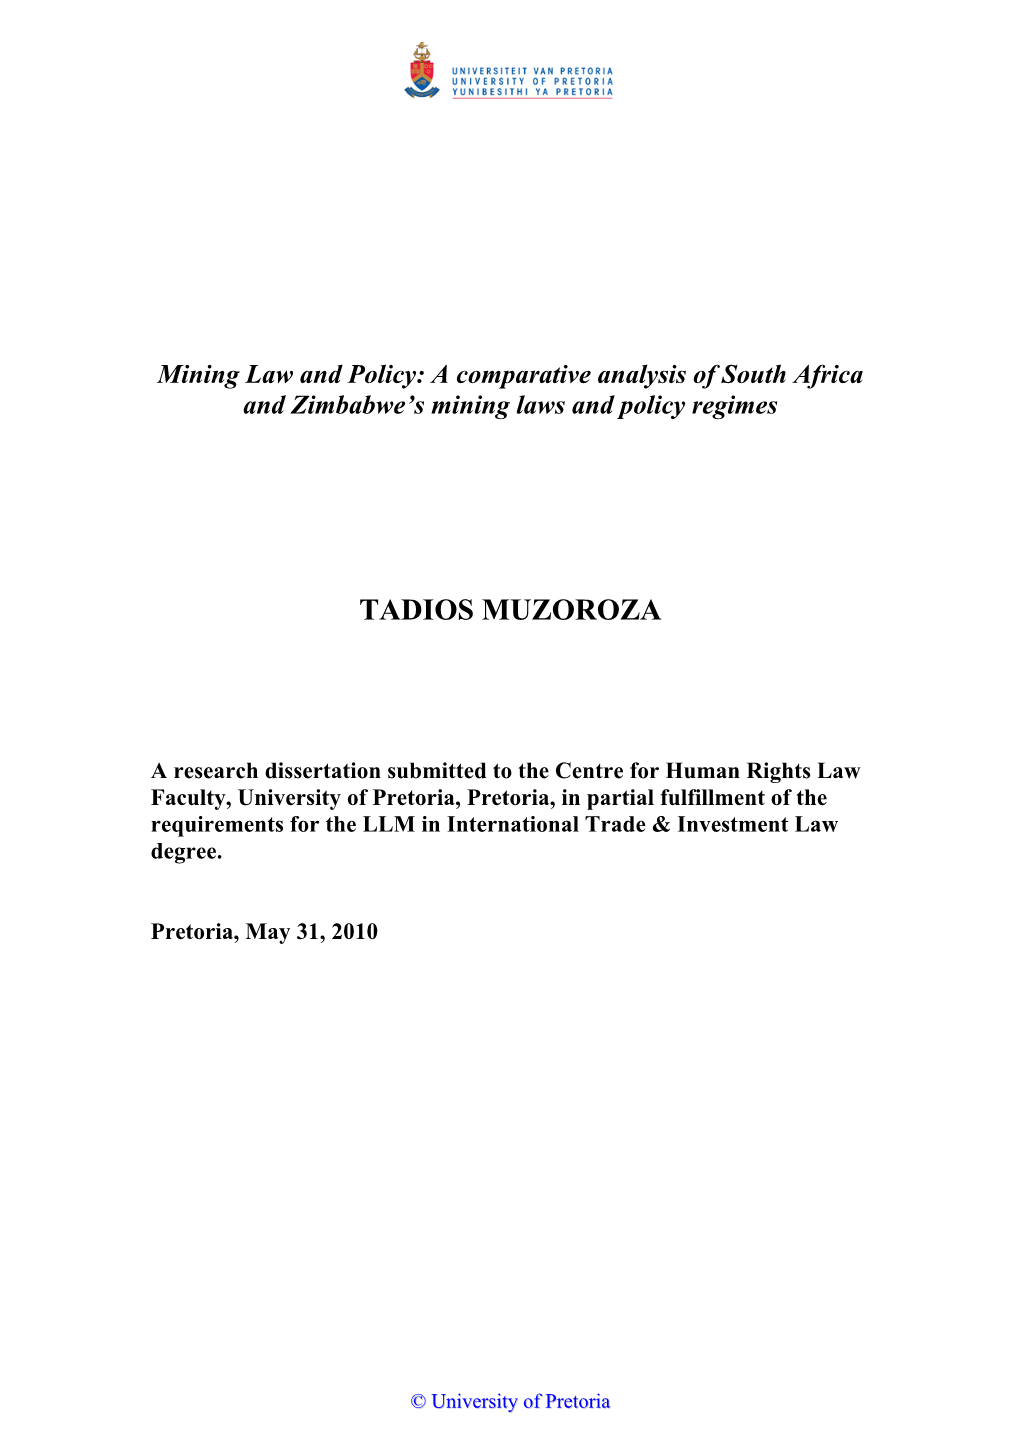 A Comparative Analysis of South Africa and Zimbabwe’S Mining Laws and Policy Regimes